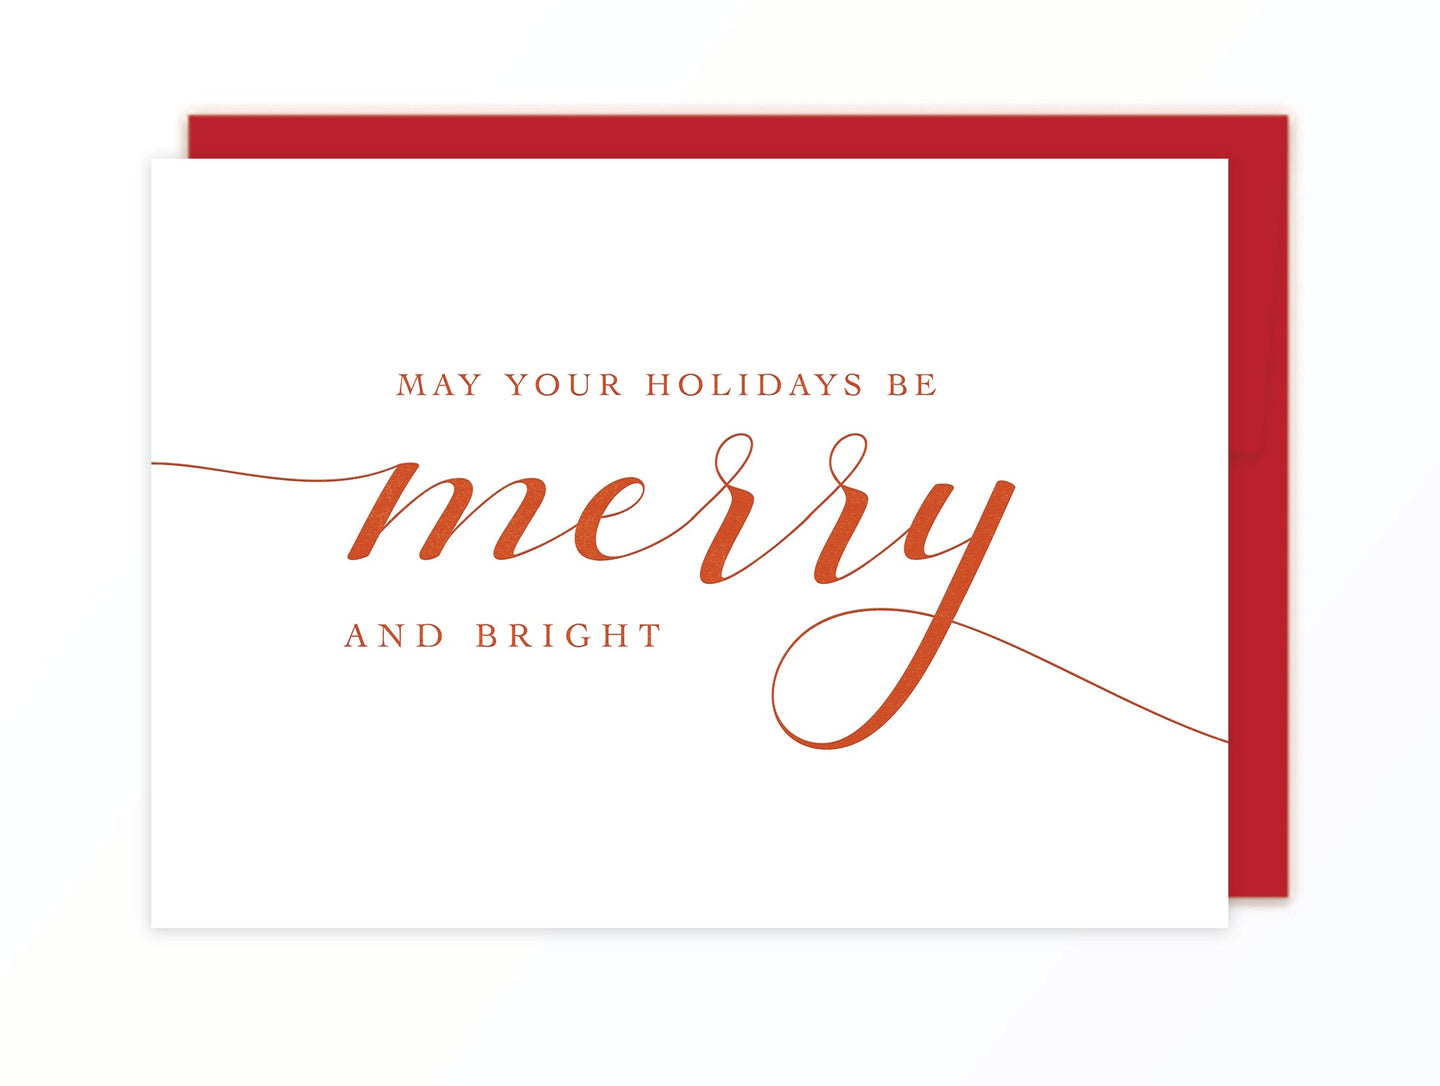 Merry and Bright Letterpress Card